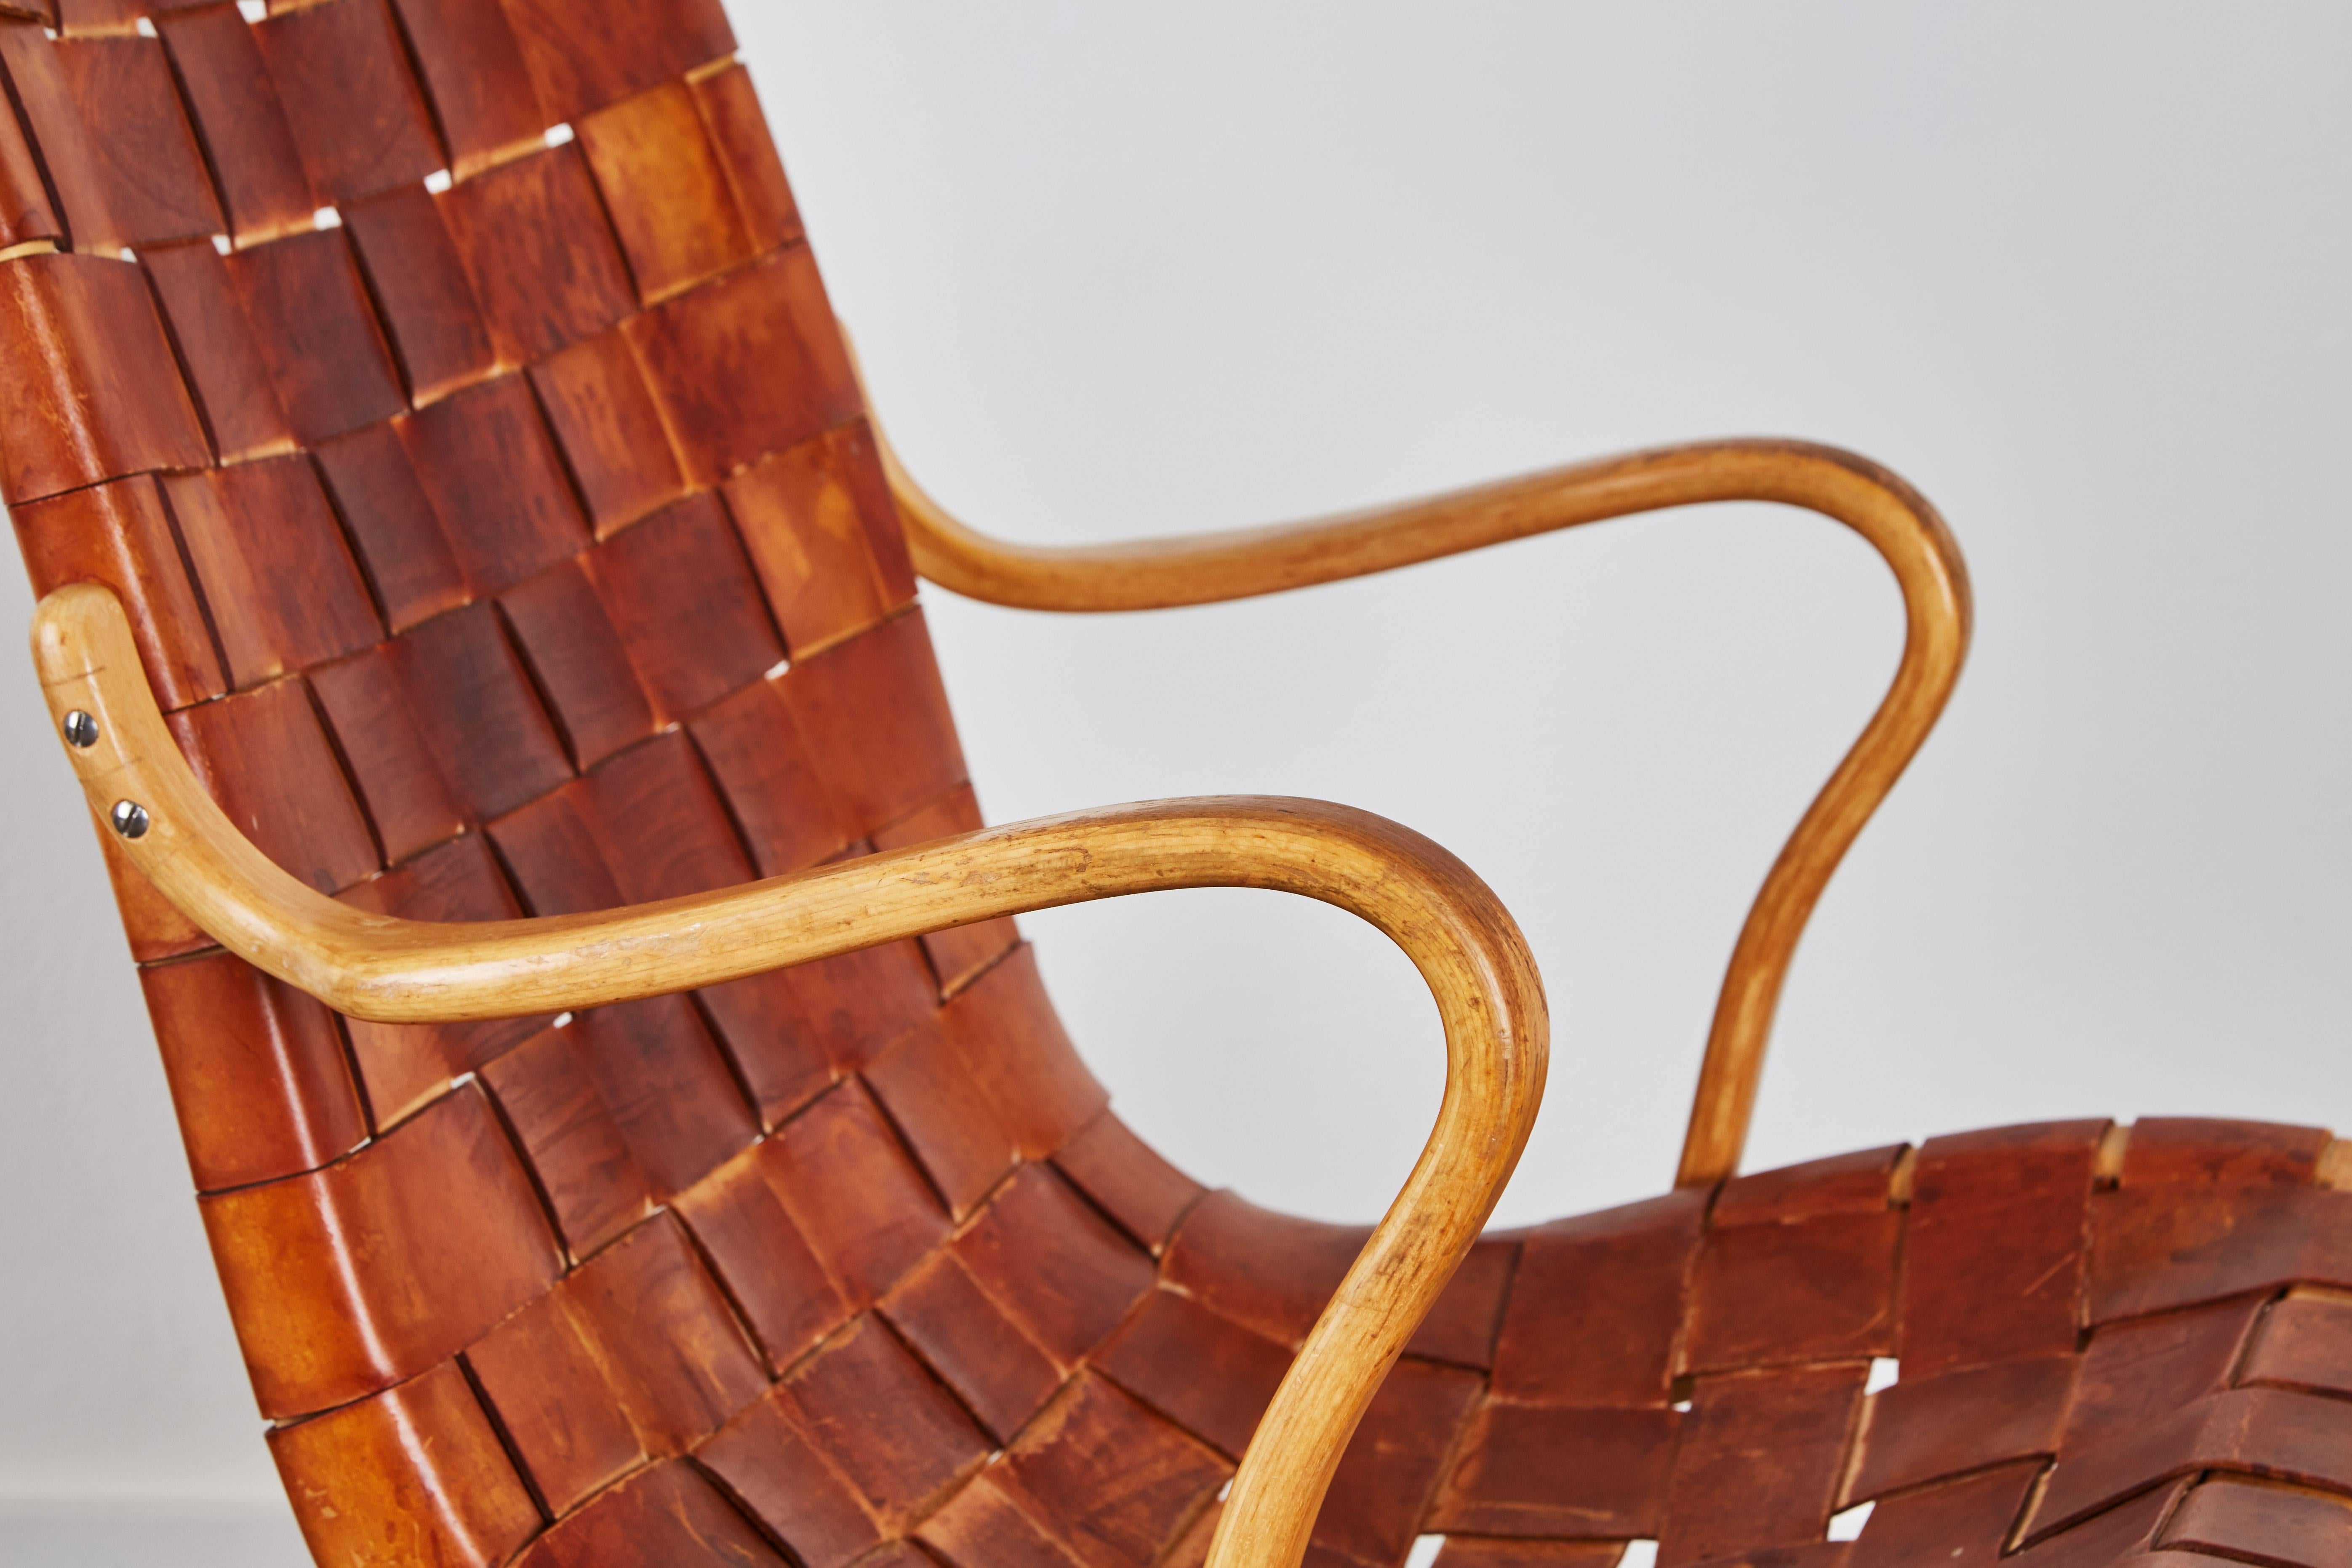 Pressed Pair of Woven Leather Eva Chairs by Bruno Mathsson